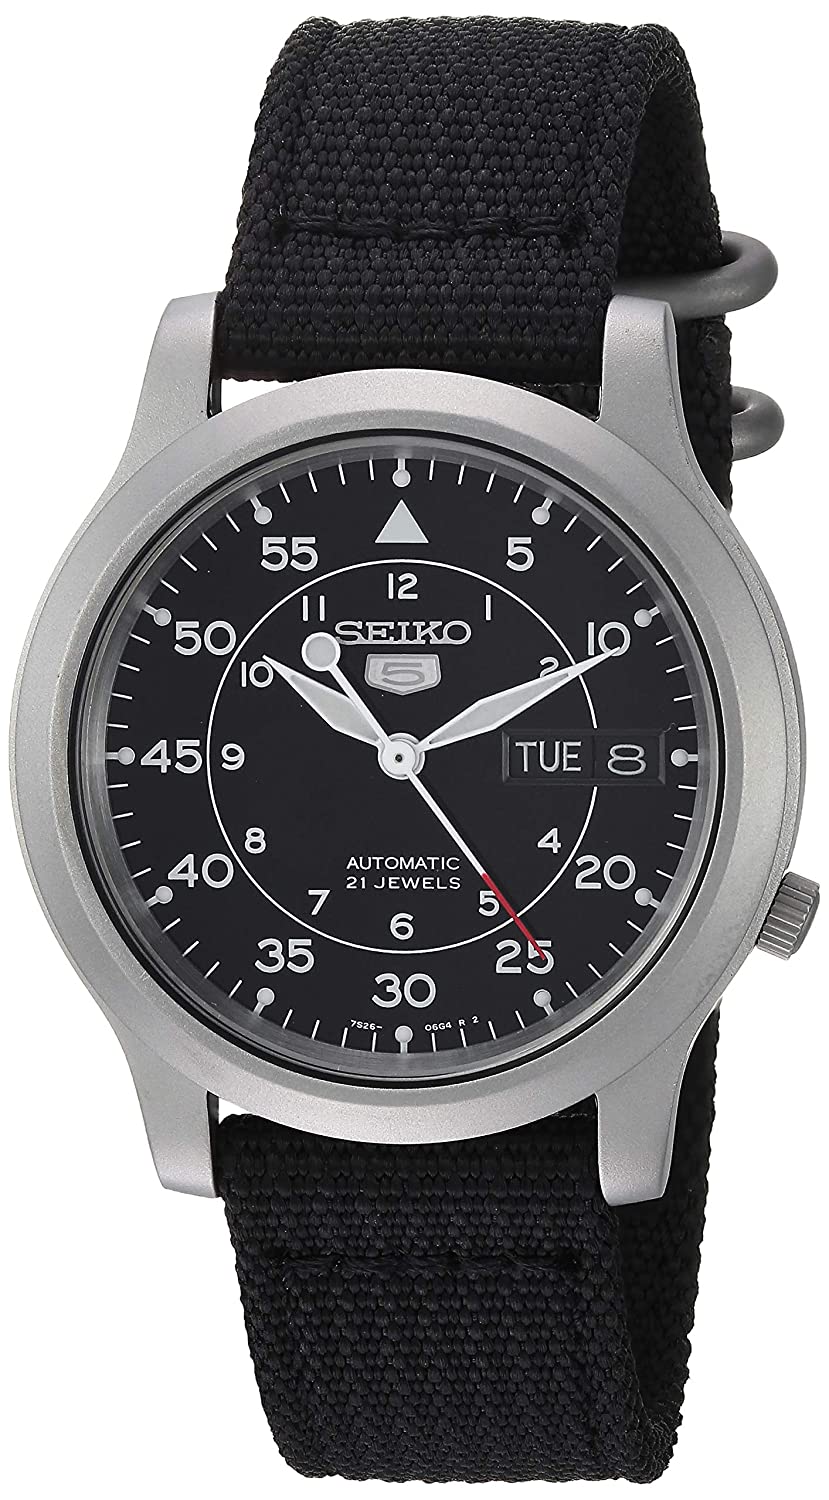 watches that don't need batteries - Seiko 5 SNK809